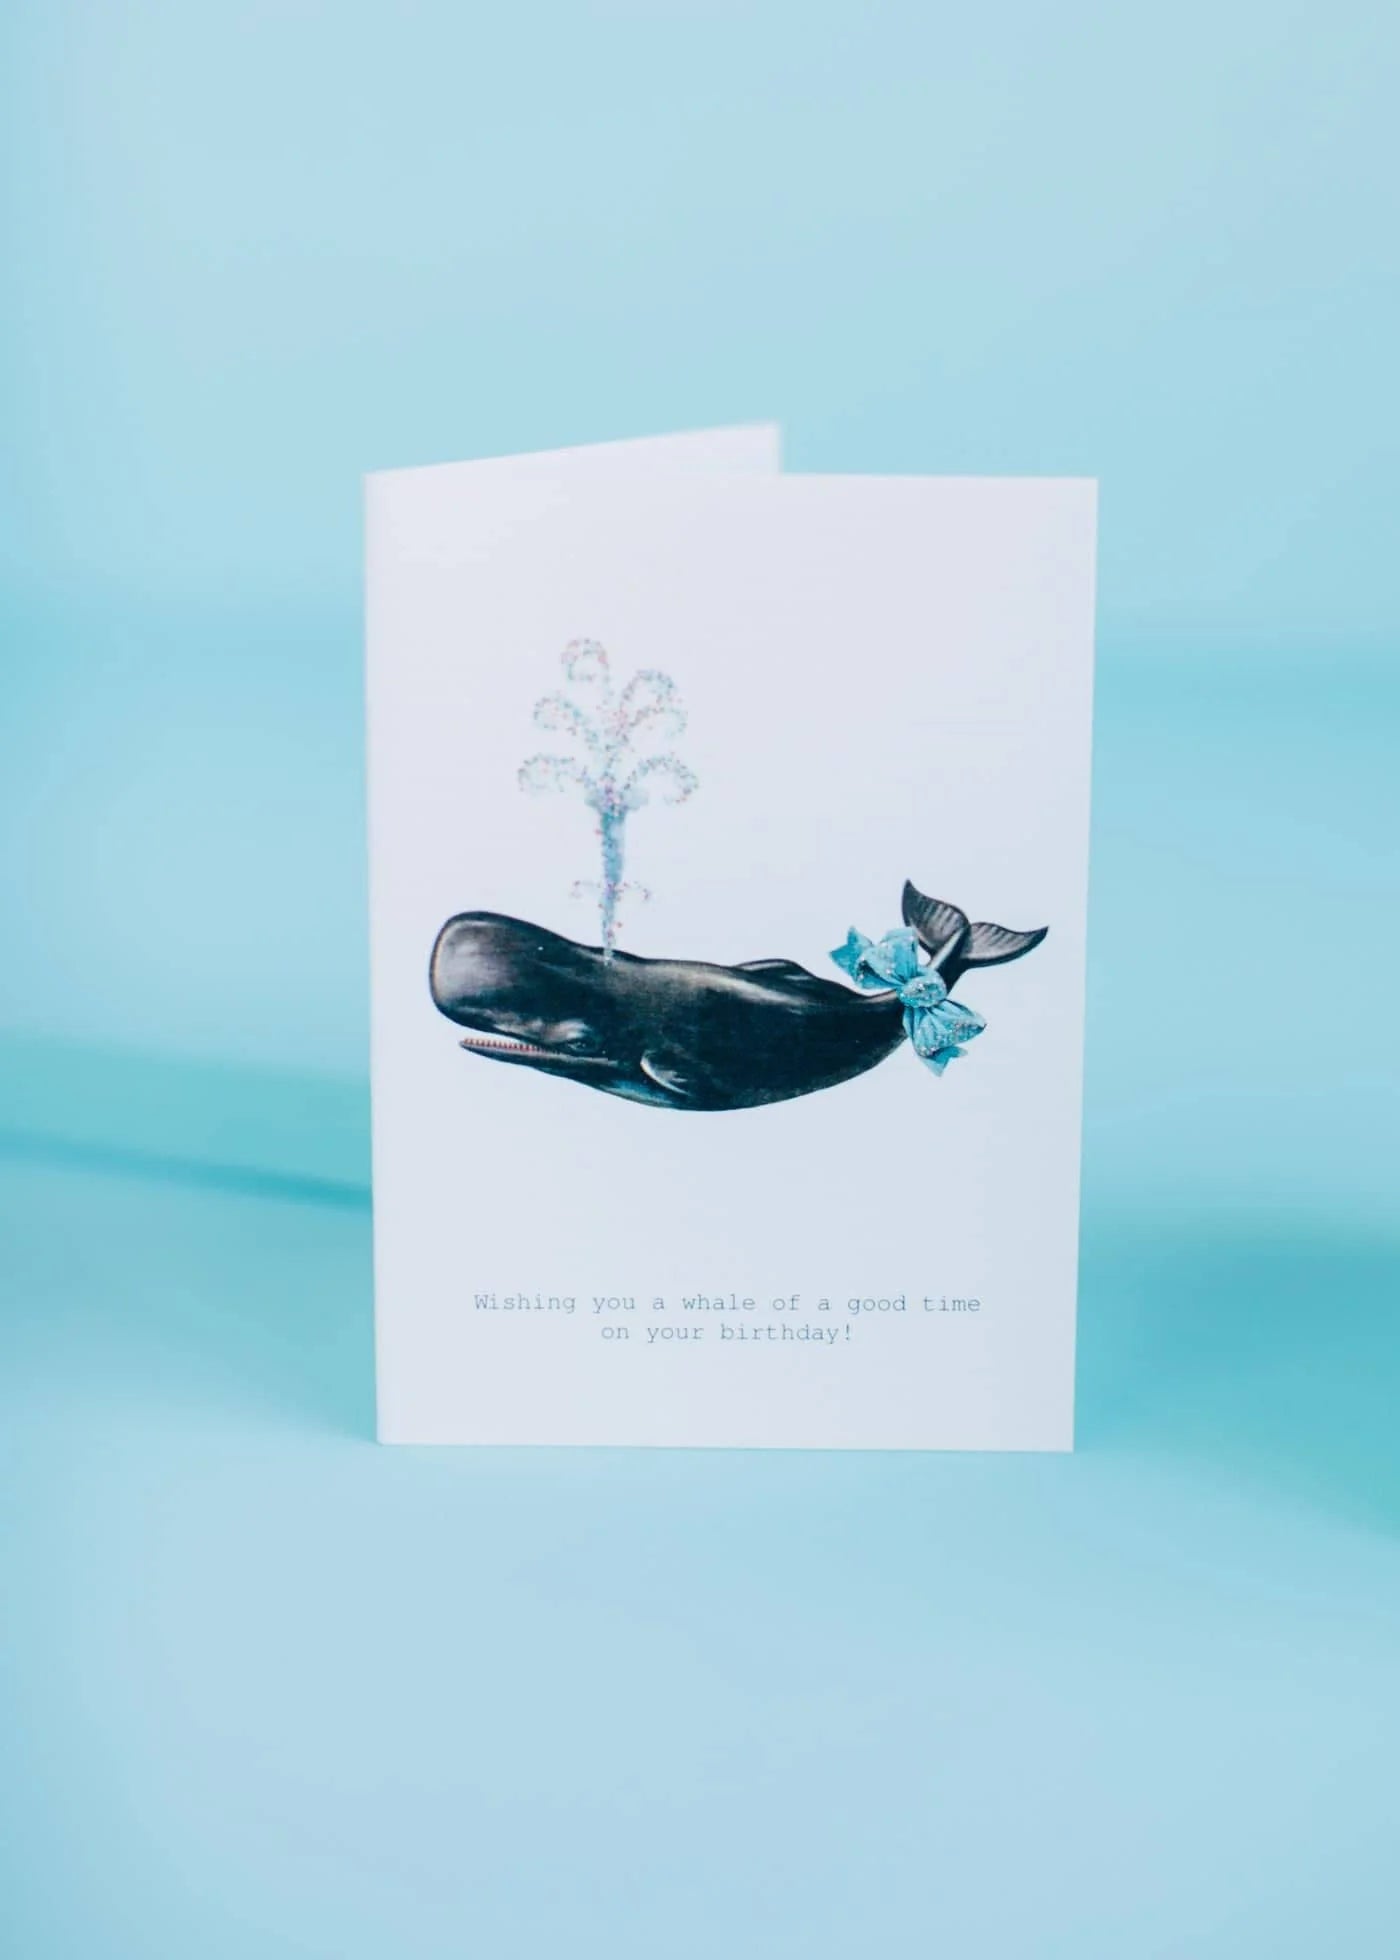 BIRTHDAY GREETING CARD "A WHALE OF A GOOD TIME"